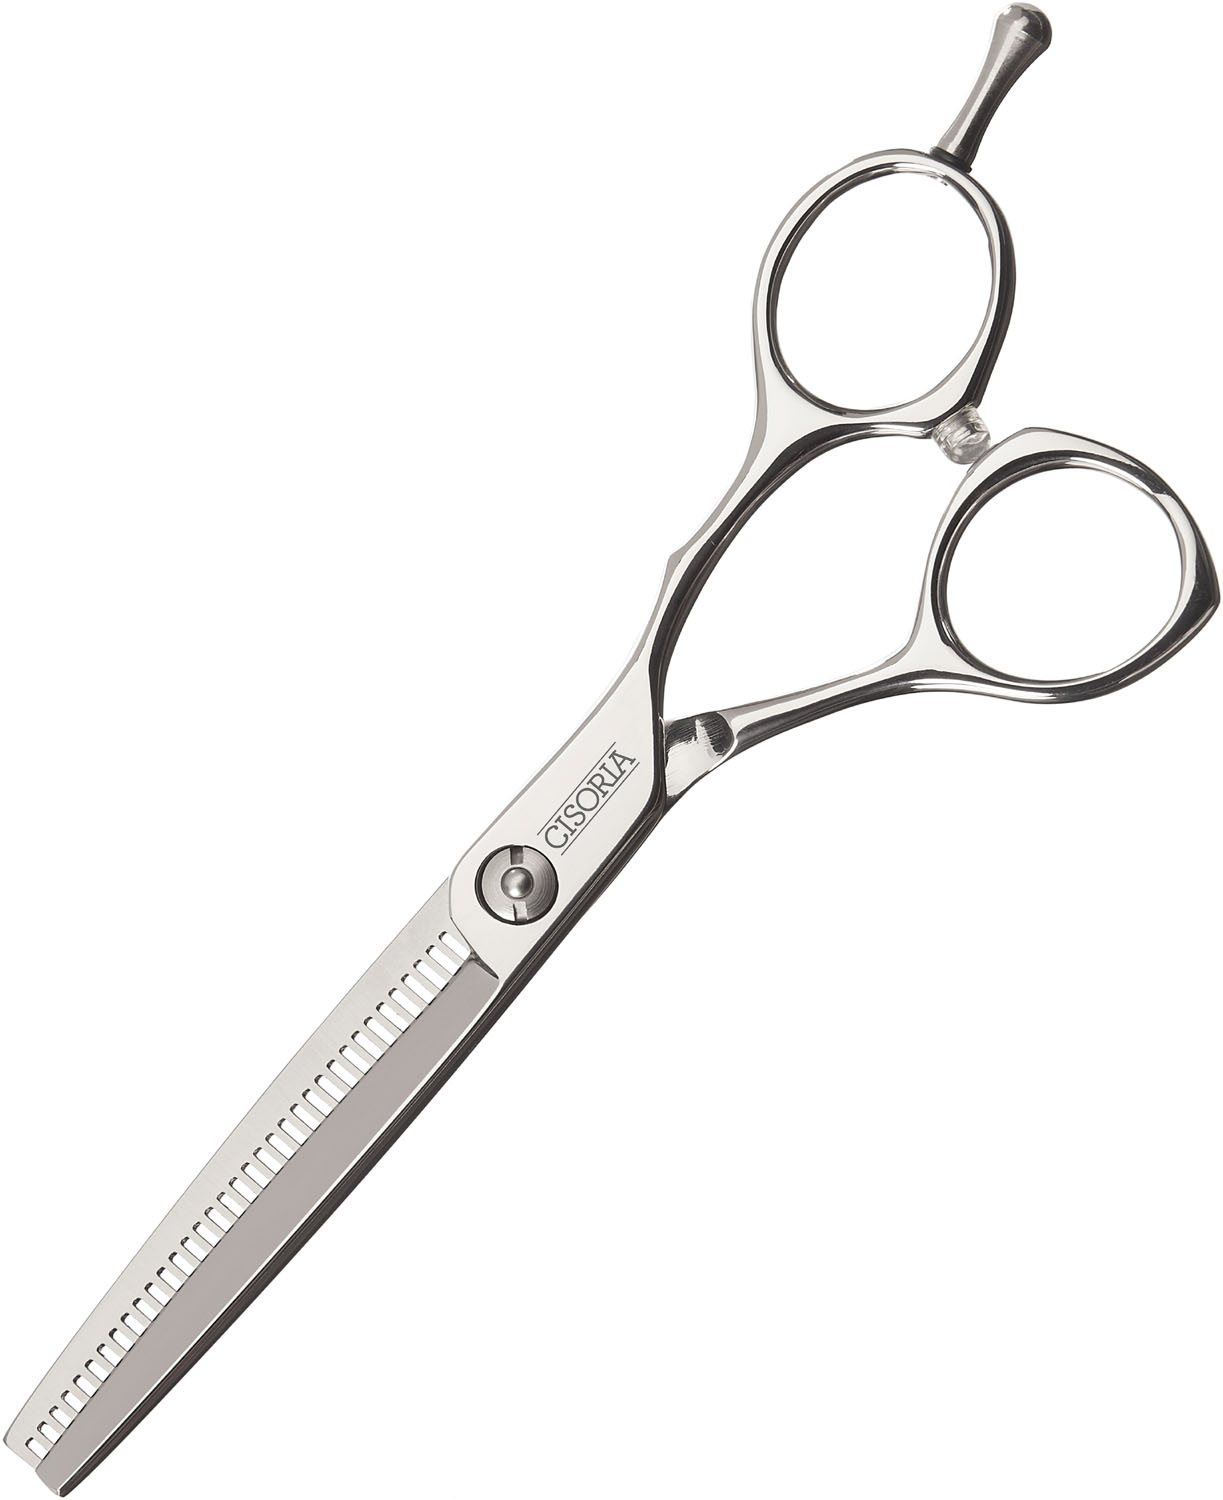  Cisoria Semi-Offset Thinning Scissors 5,75" Serie SOT35 by Sibel 